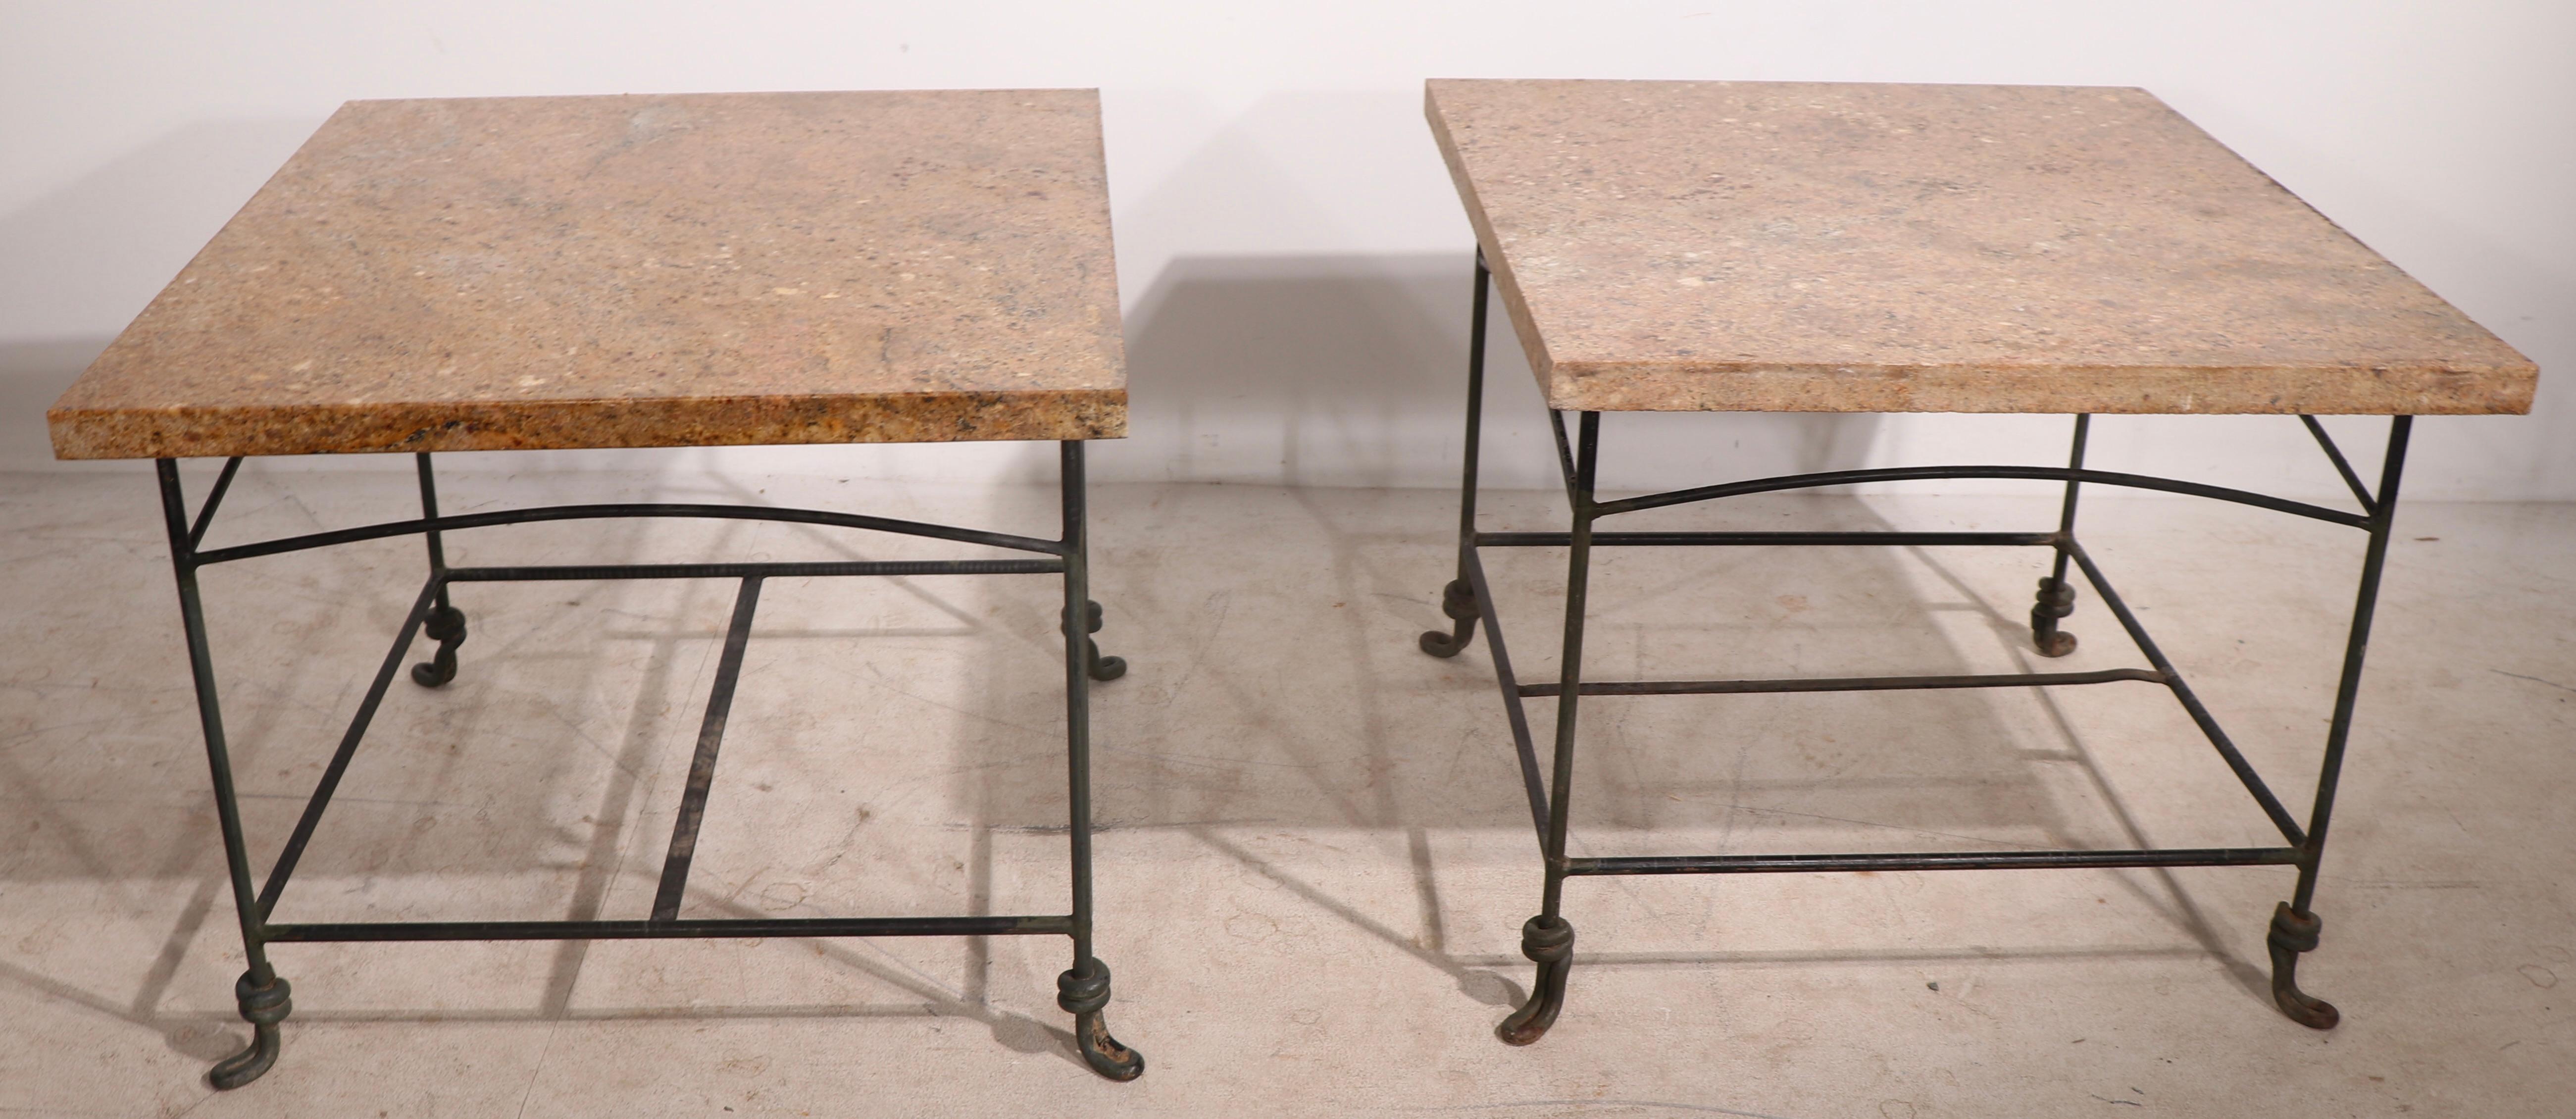 20th Century Pr. Wrought Iron Garden Patio End Tables with Polished Granite Tops